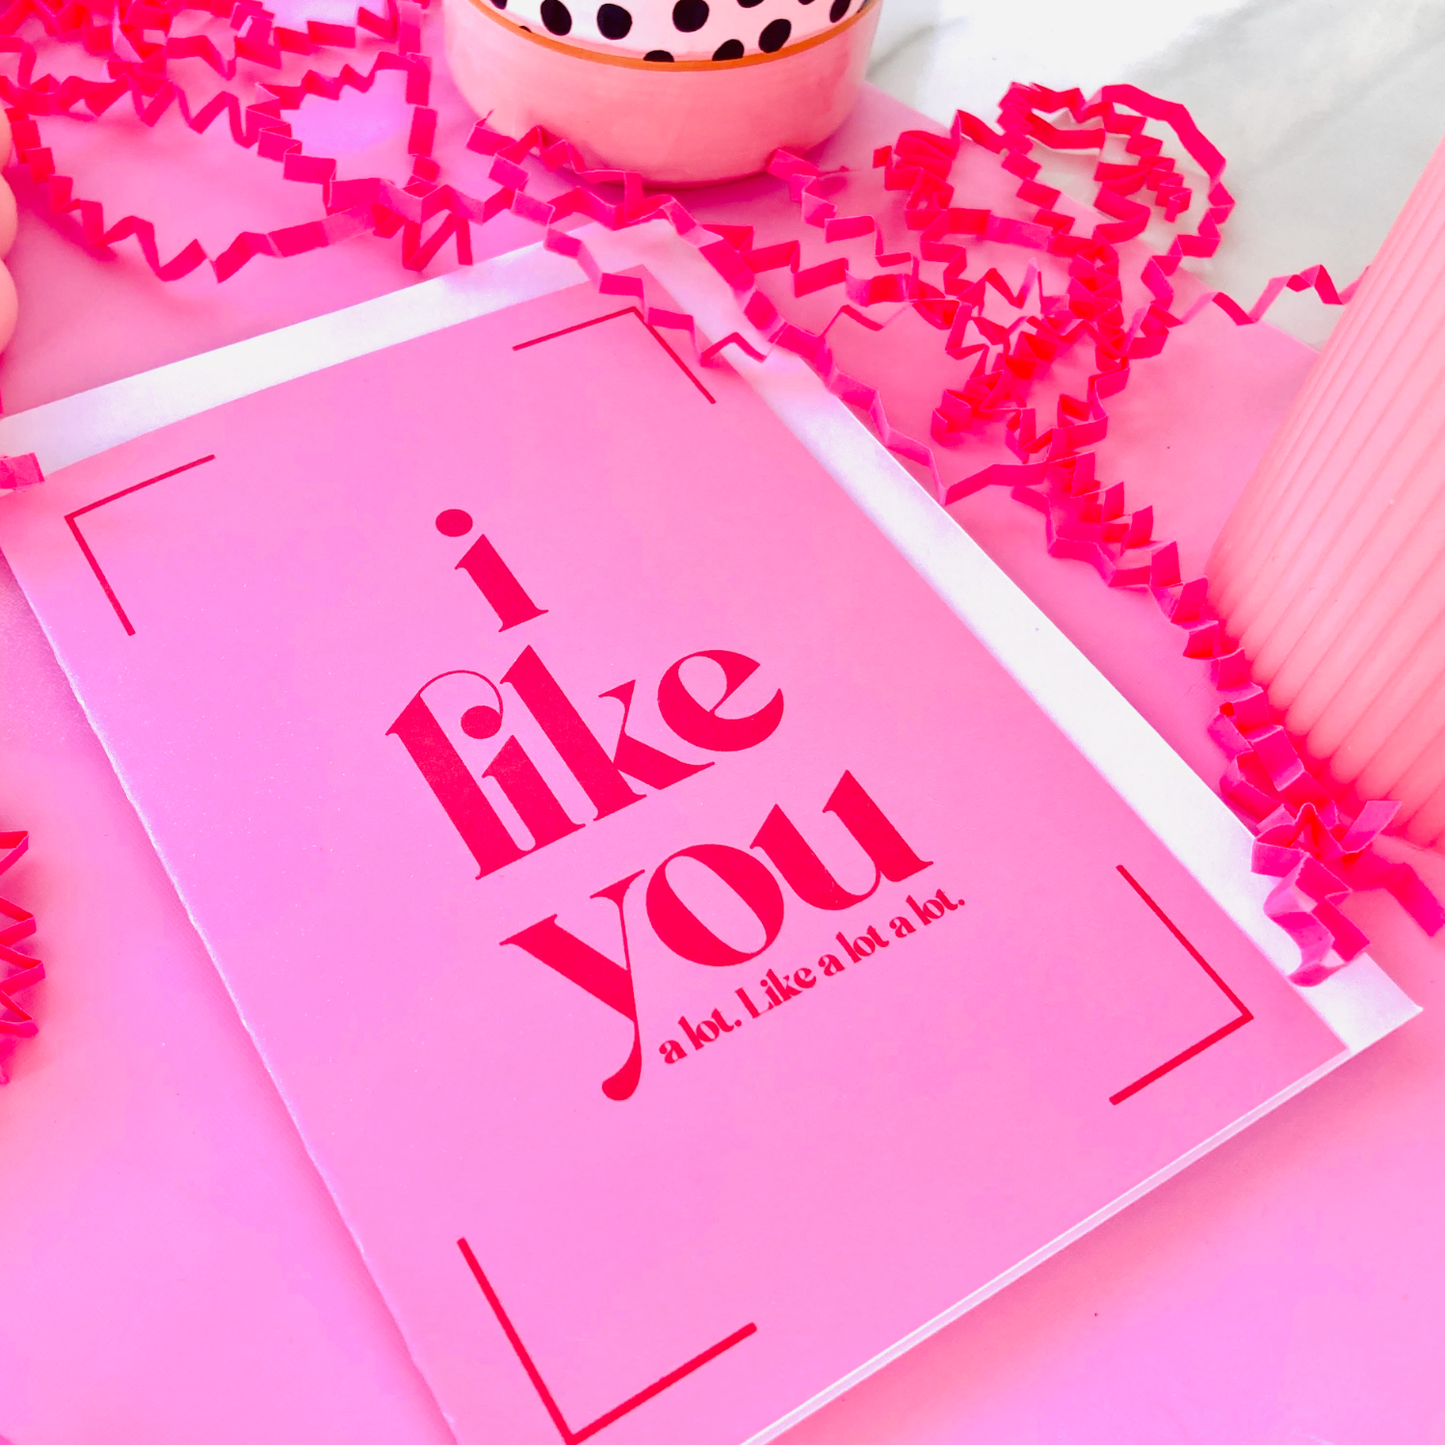 I Like You (a lot) Valentines Day Card